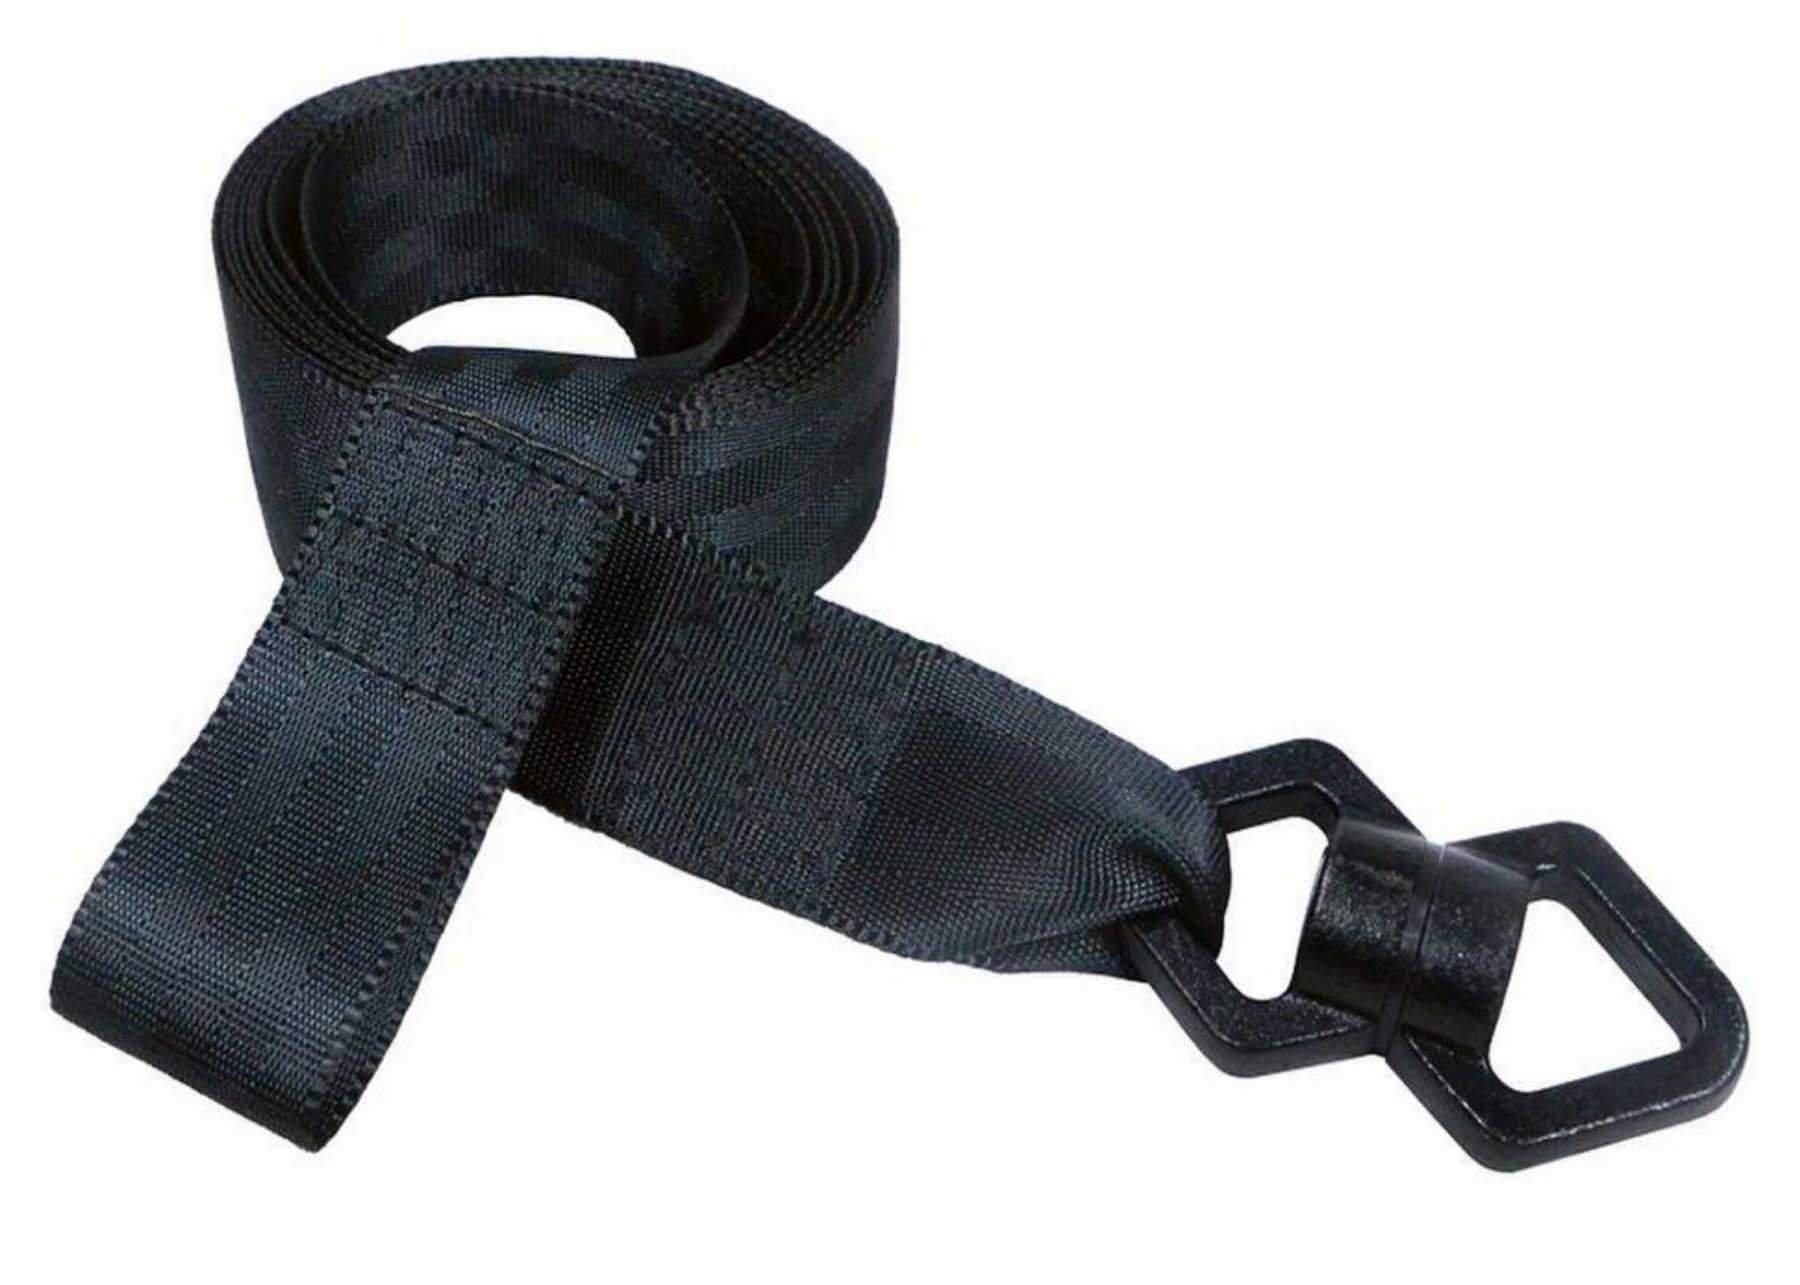 10 ft Tree Swing Strap with Cyclone Spinner Swivel 